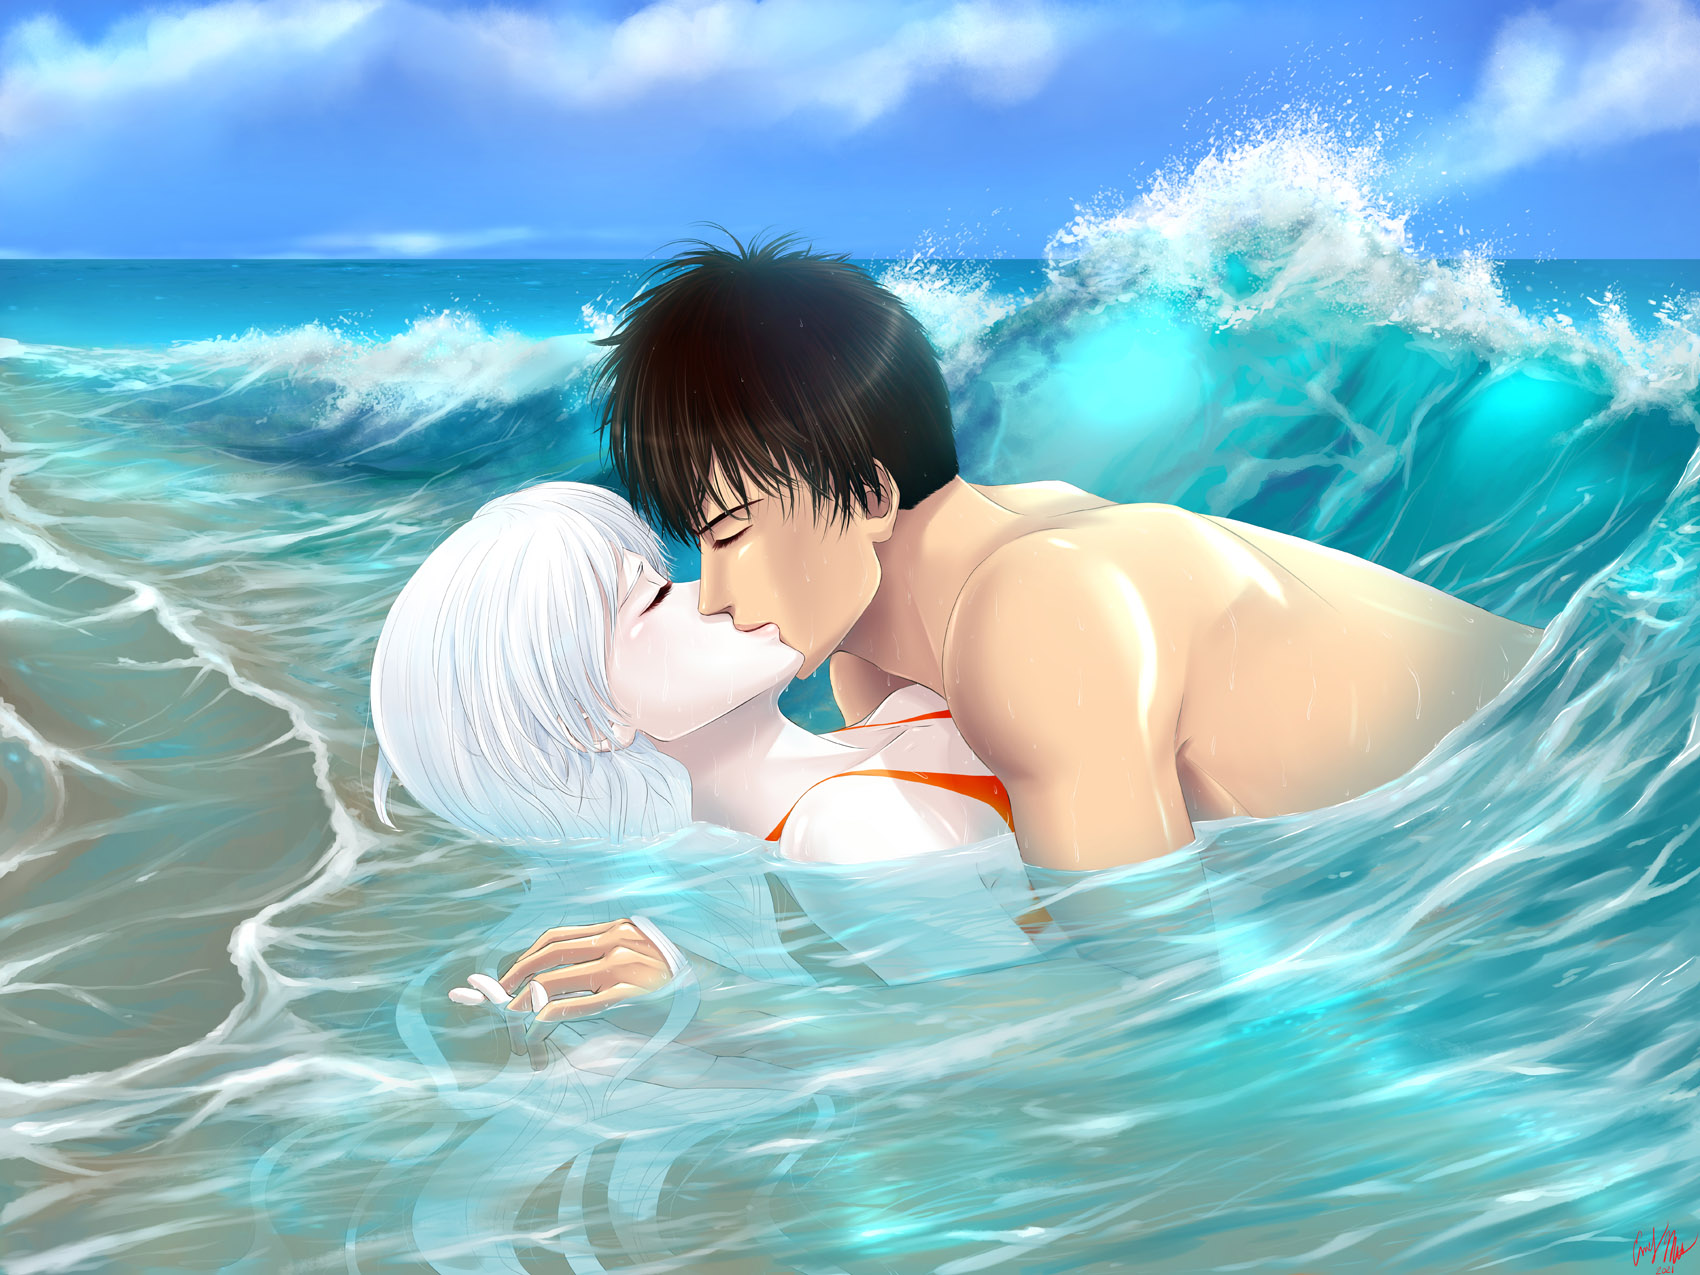 A couple kissing in the waves